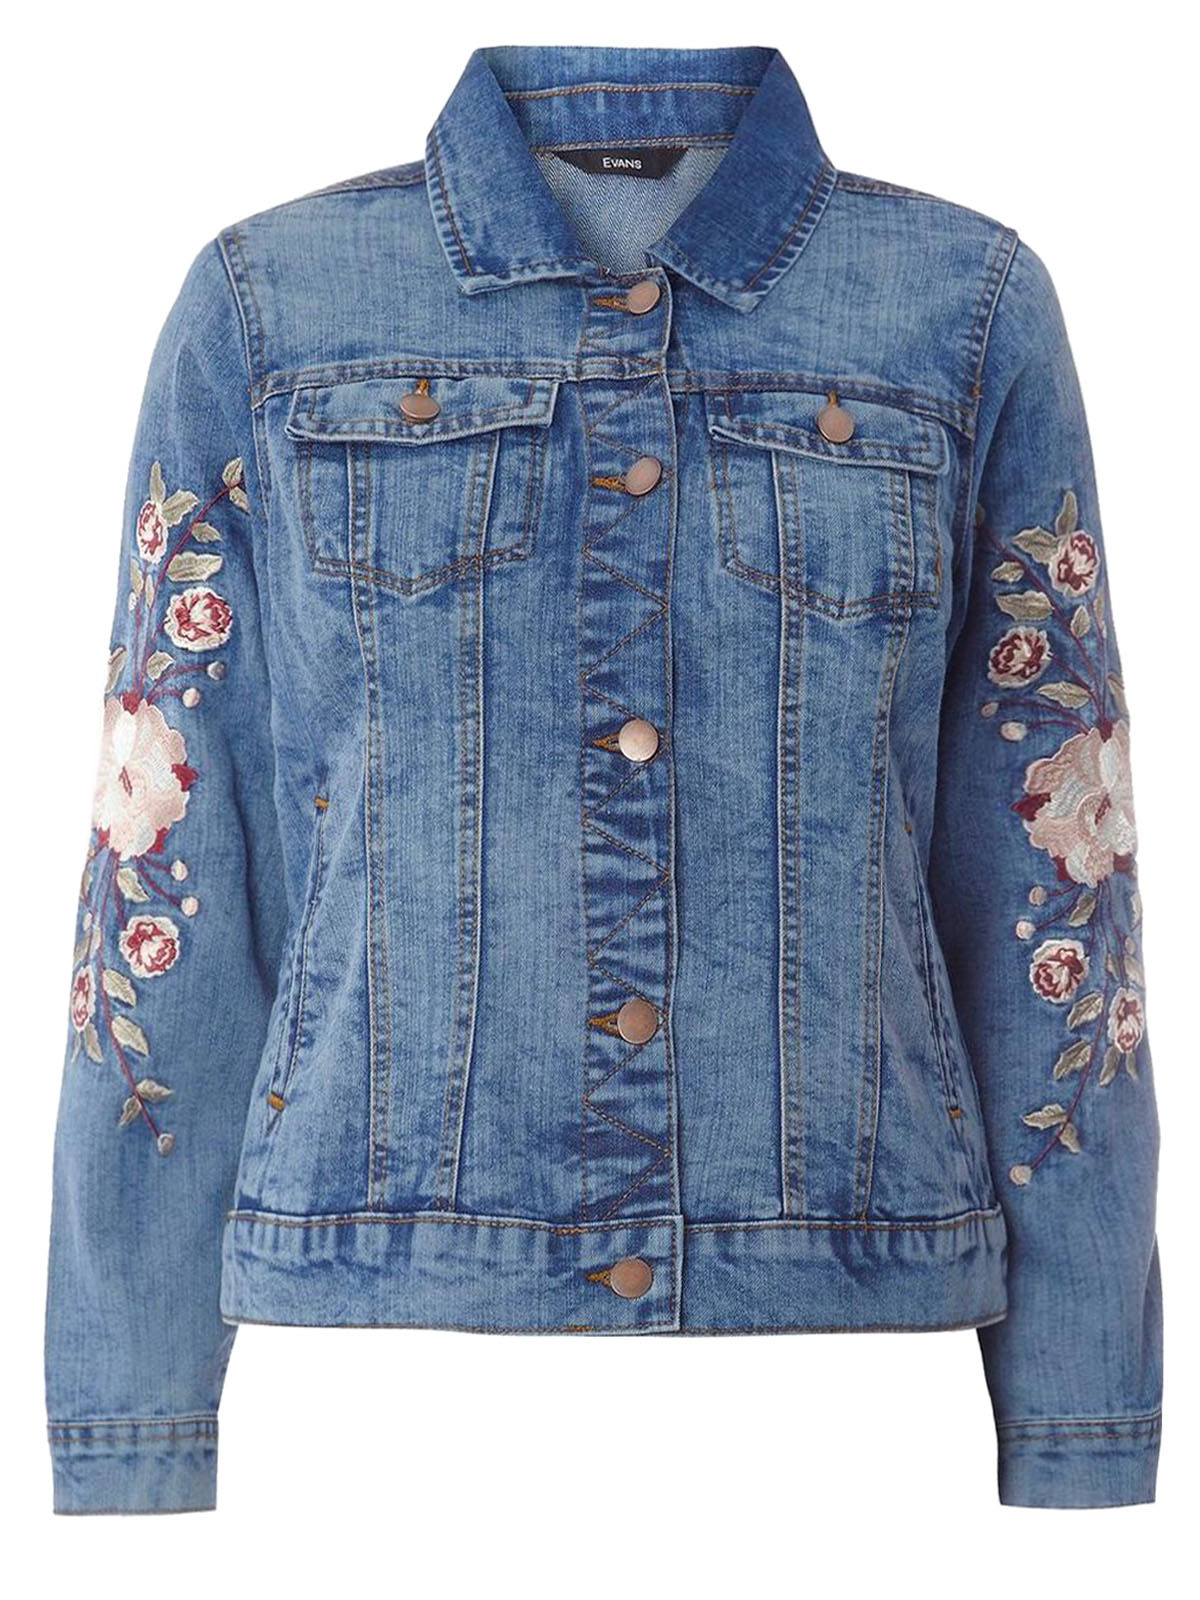 DENIM BLUE Floral Embroidery Sleeves Denim Jacket - Plus Size 26 to 28